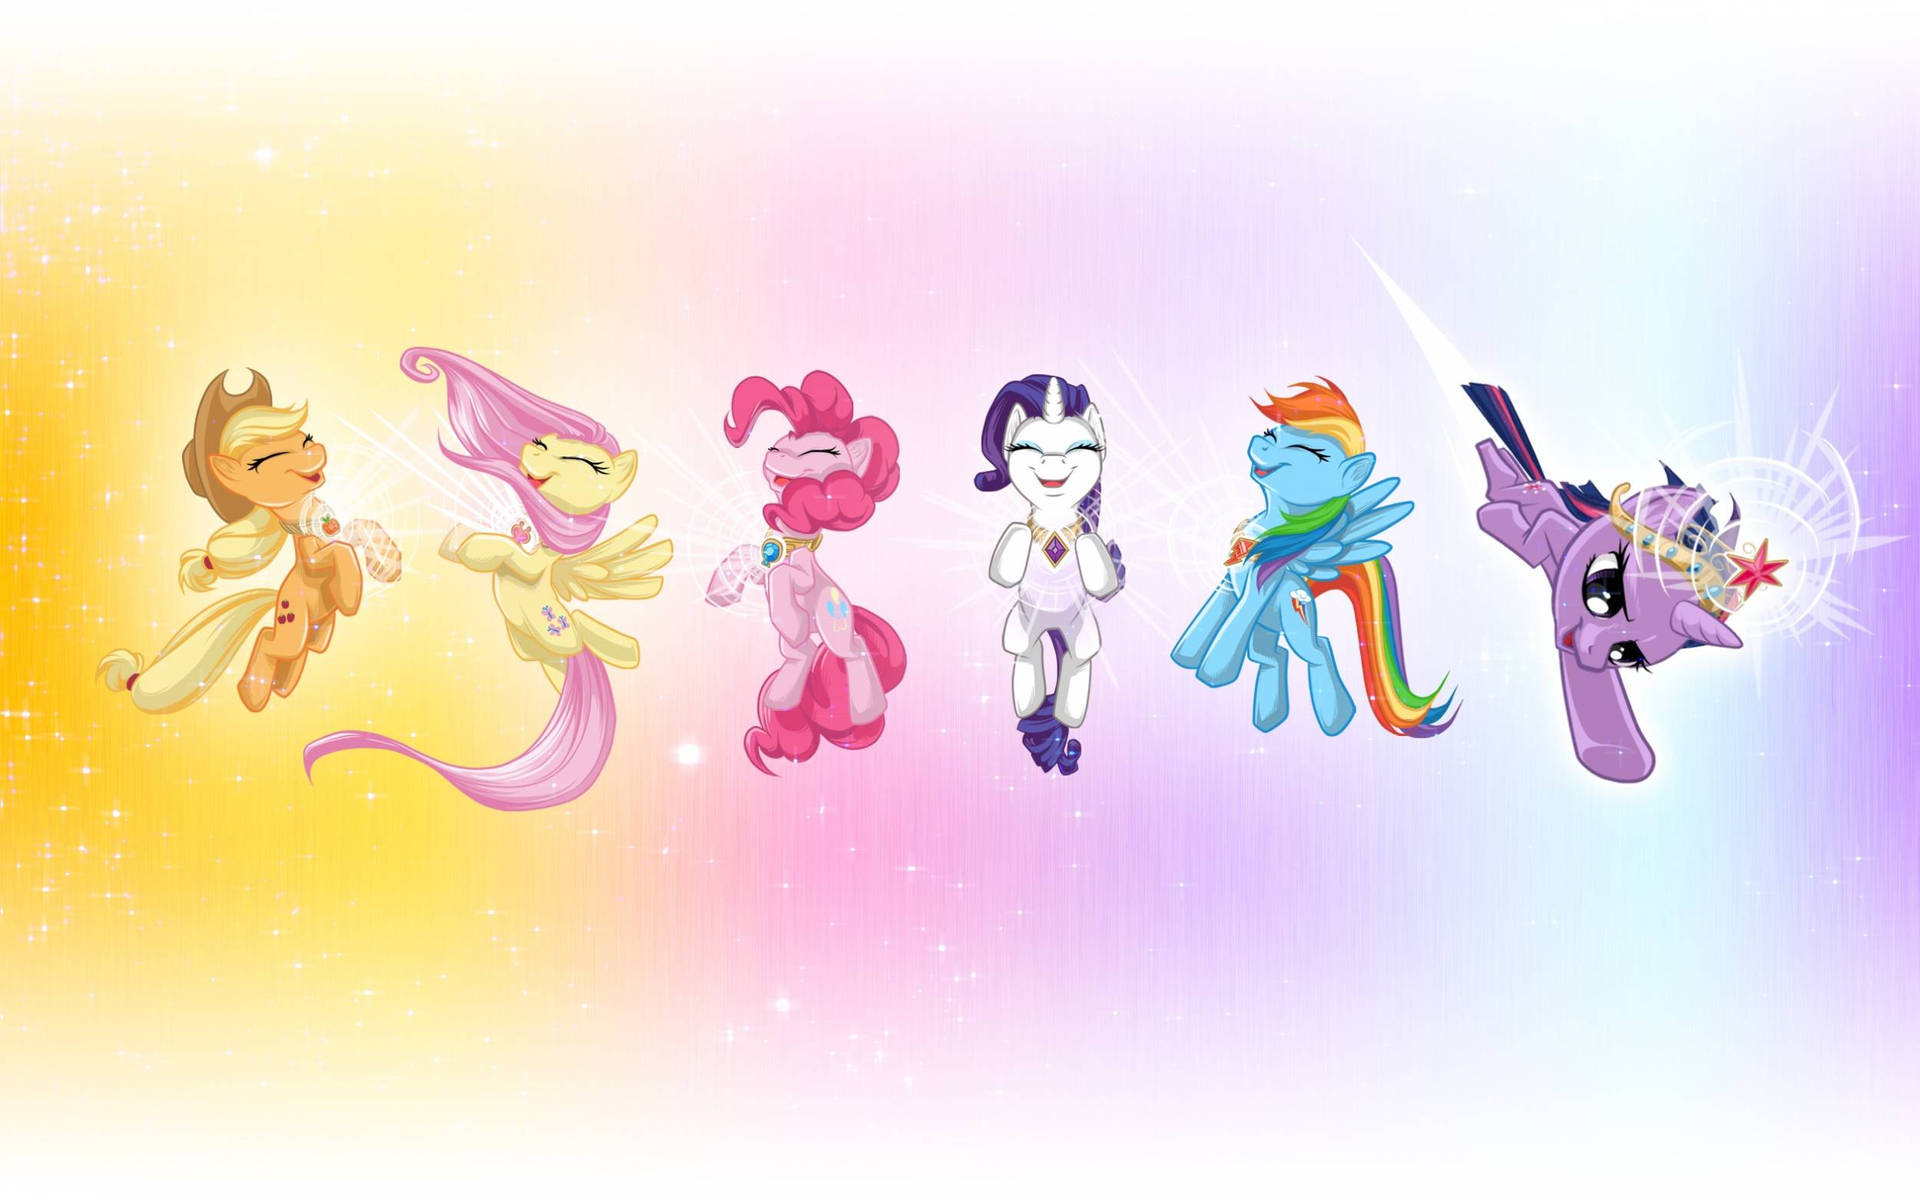 100+] My Little Pony Desktop Background s for FREE 